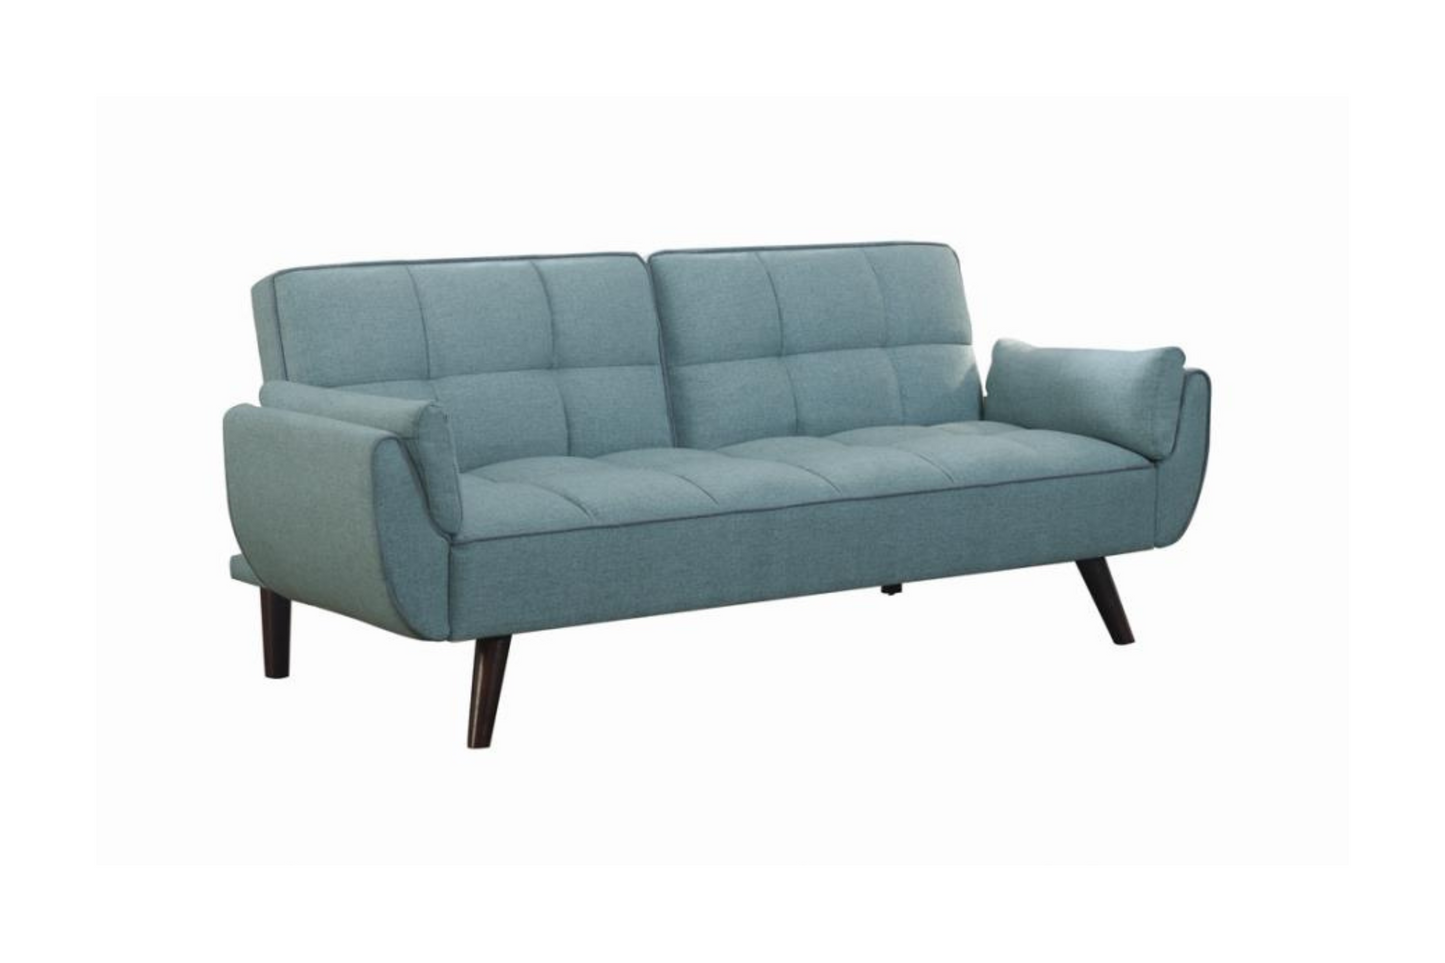 Riga Biscuit-tufted Sofa Bed Turquoise Blue Model 18360097